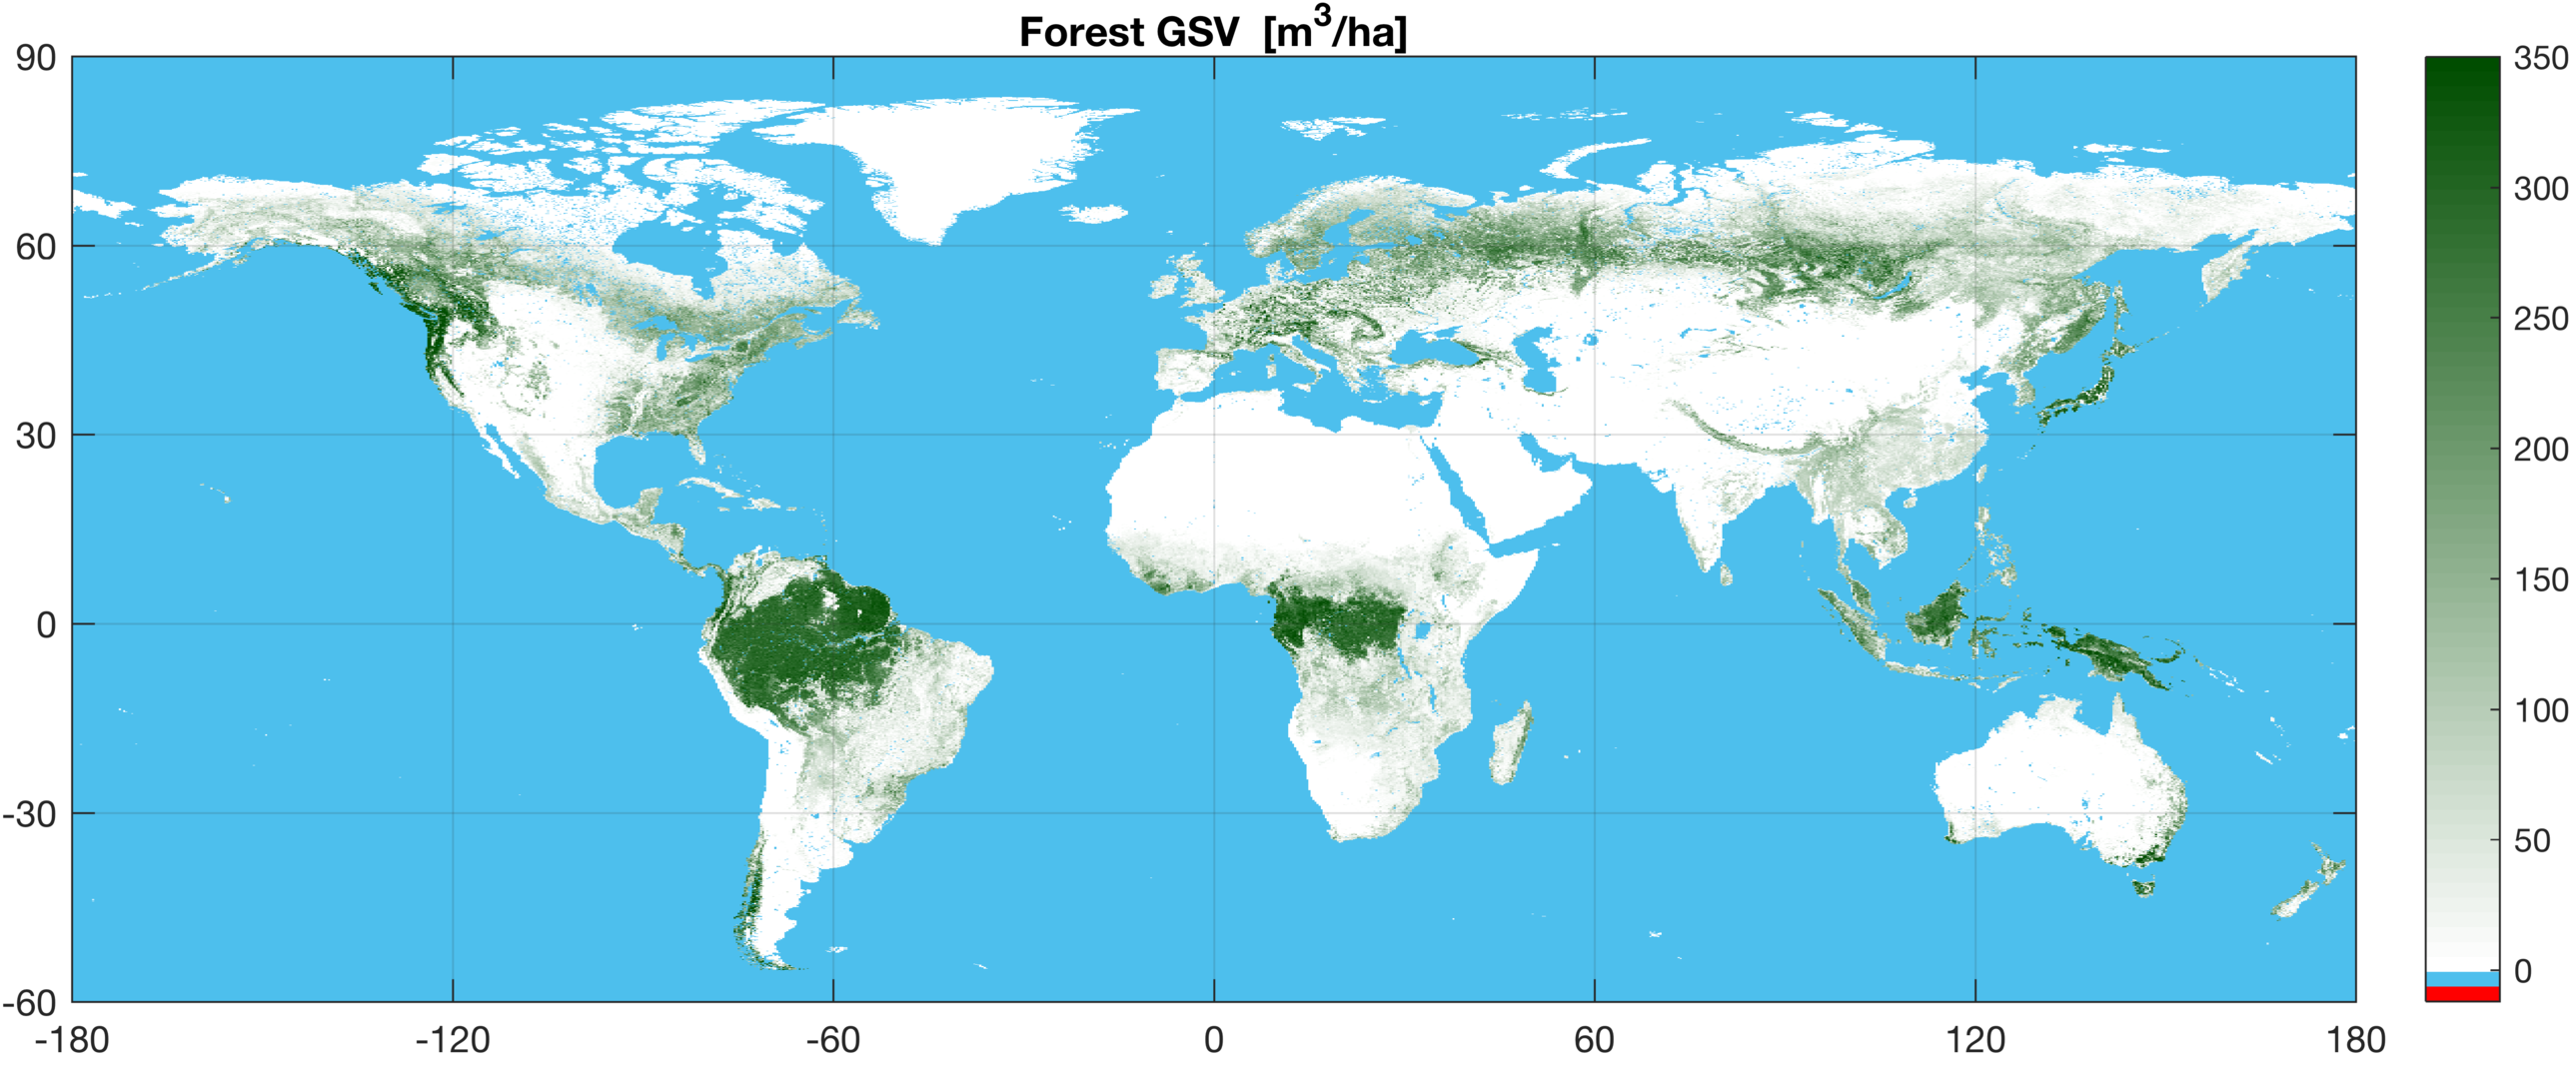 Global biomass for 2010